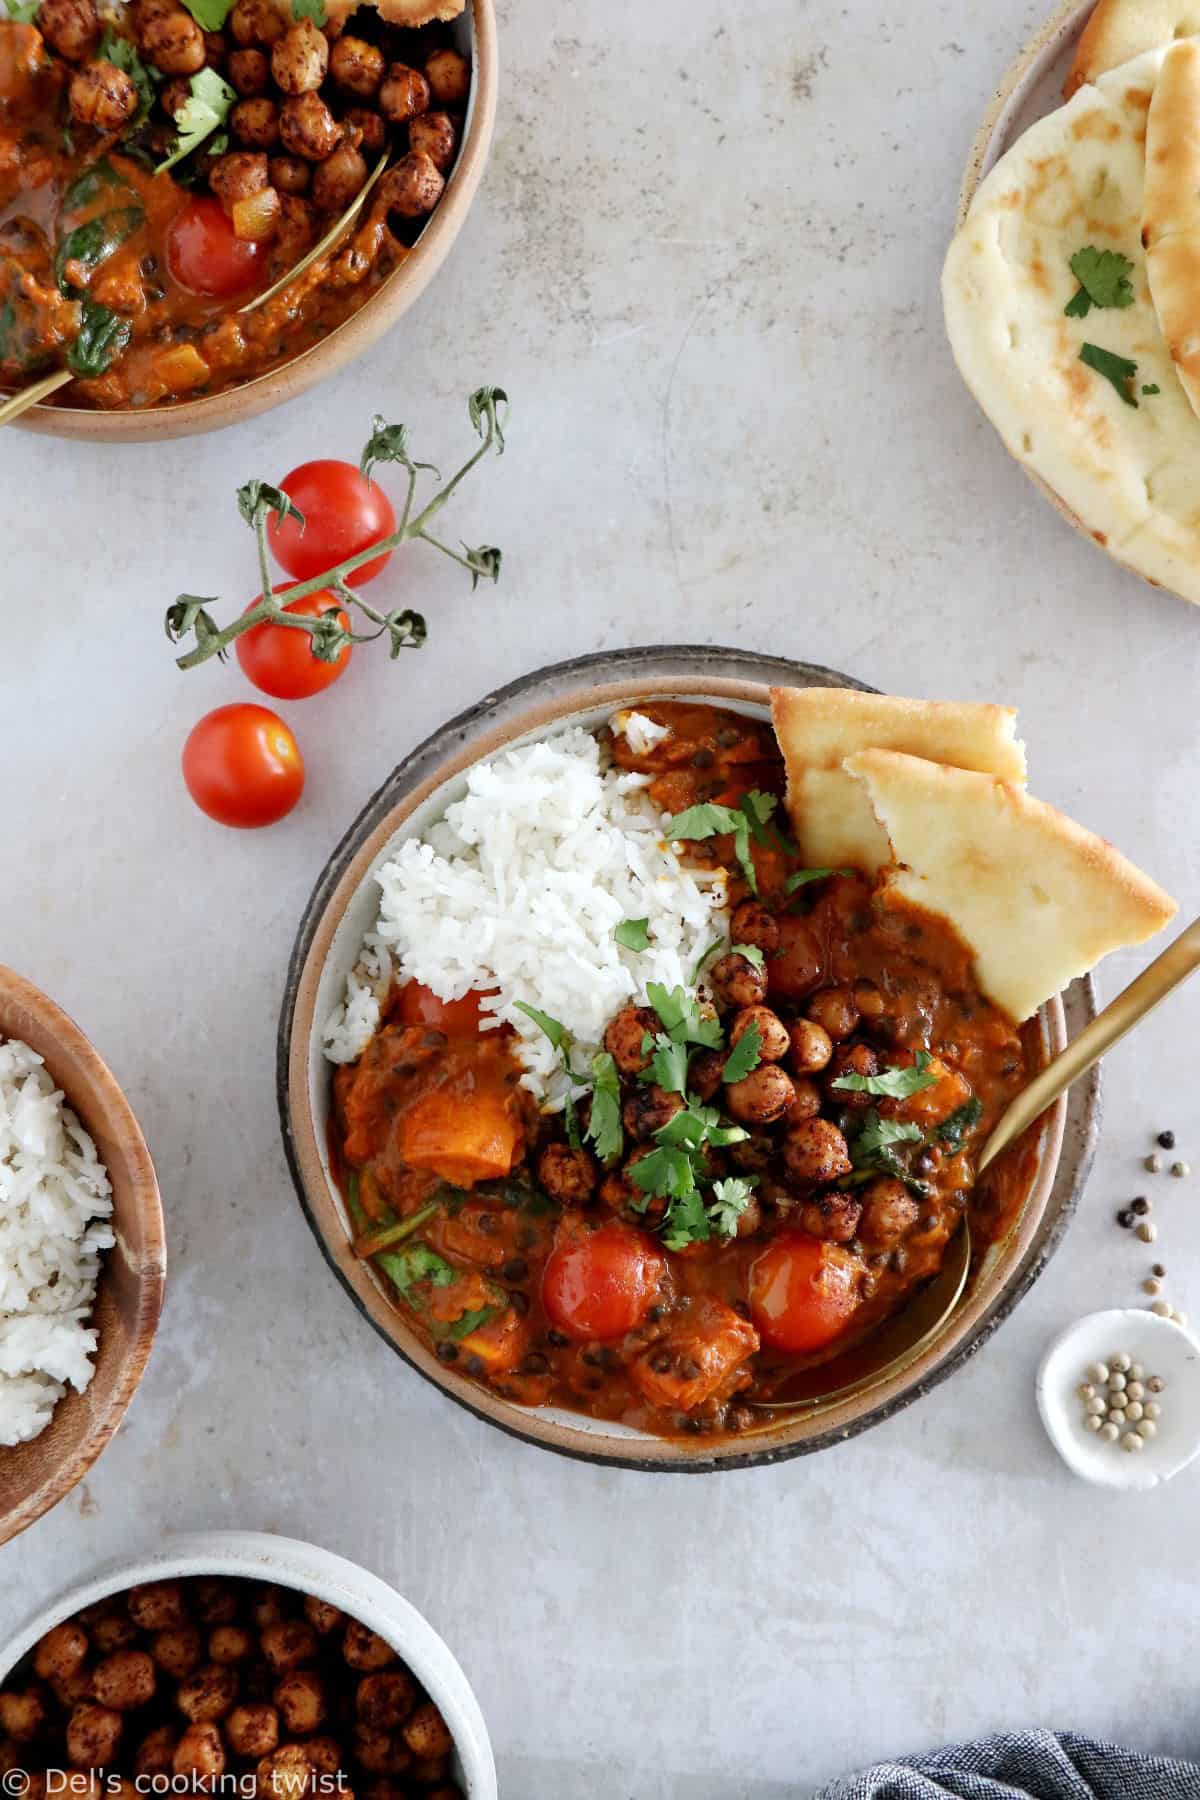 This lentil, chickpea and sweet potato curry is vegan, gluten-free, and a makes a great healthy weeknight meal.